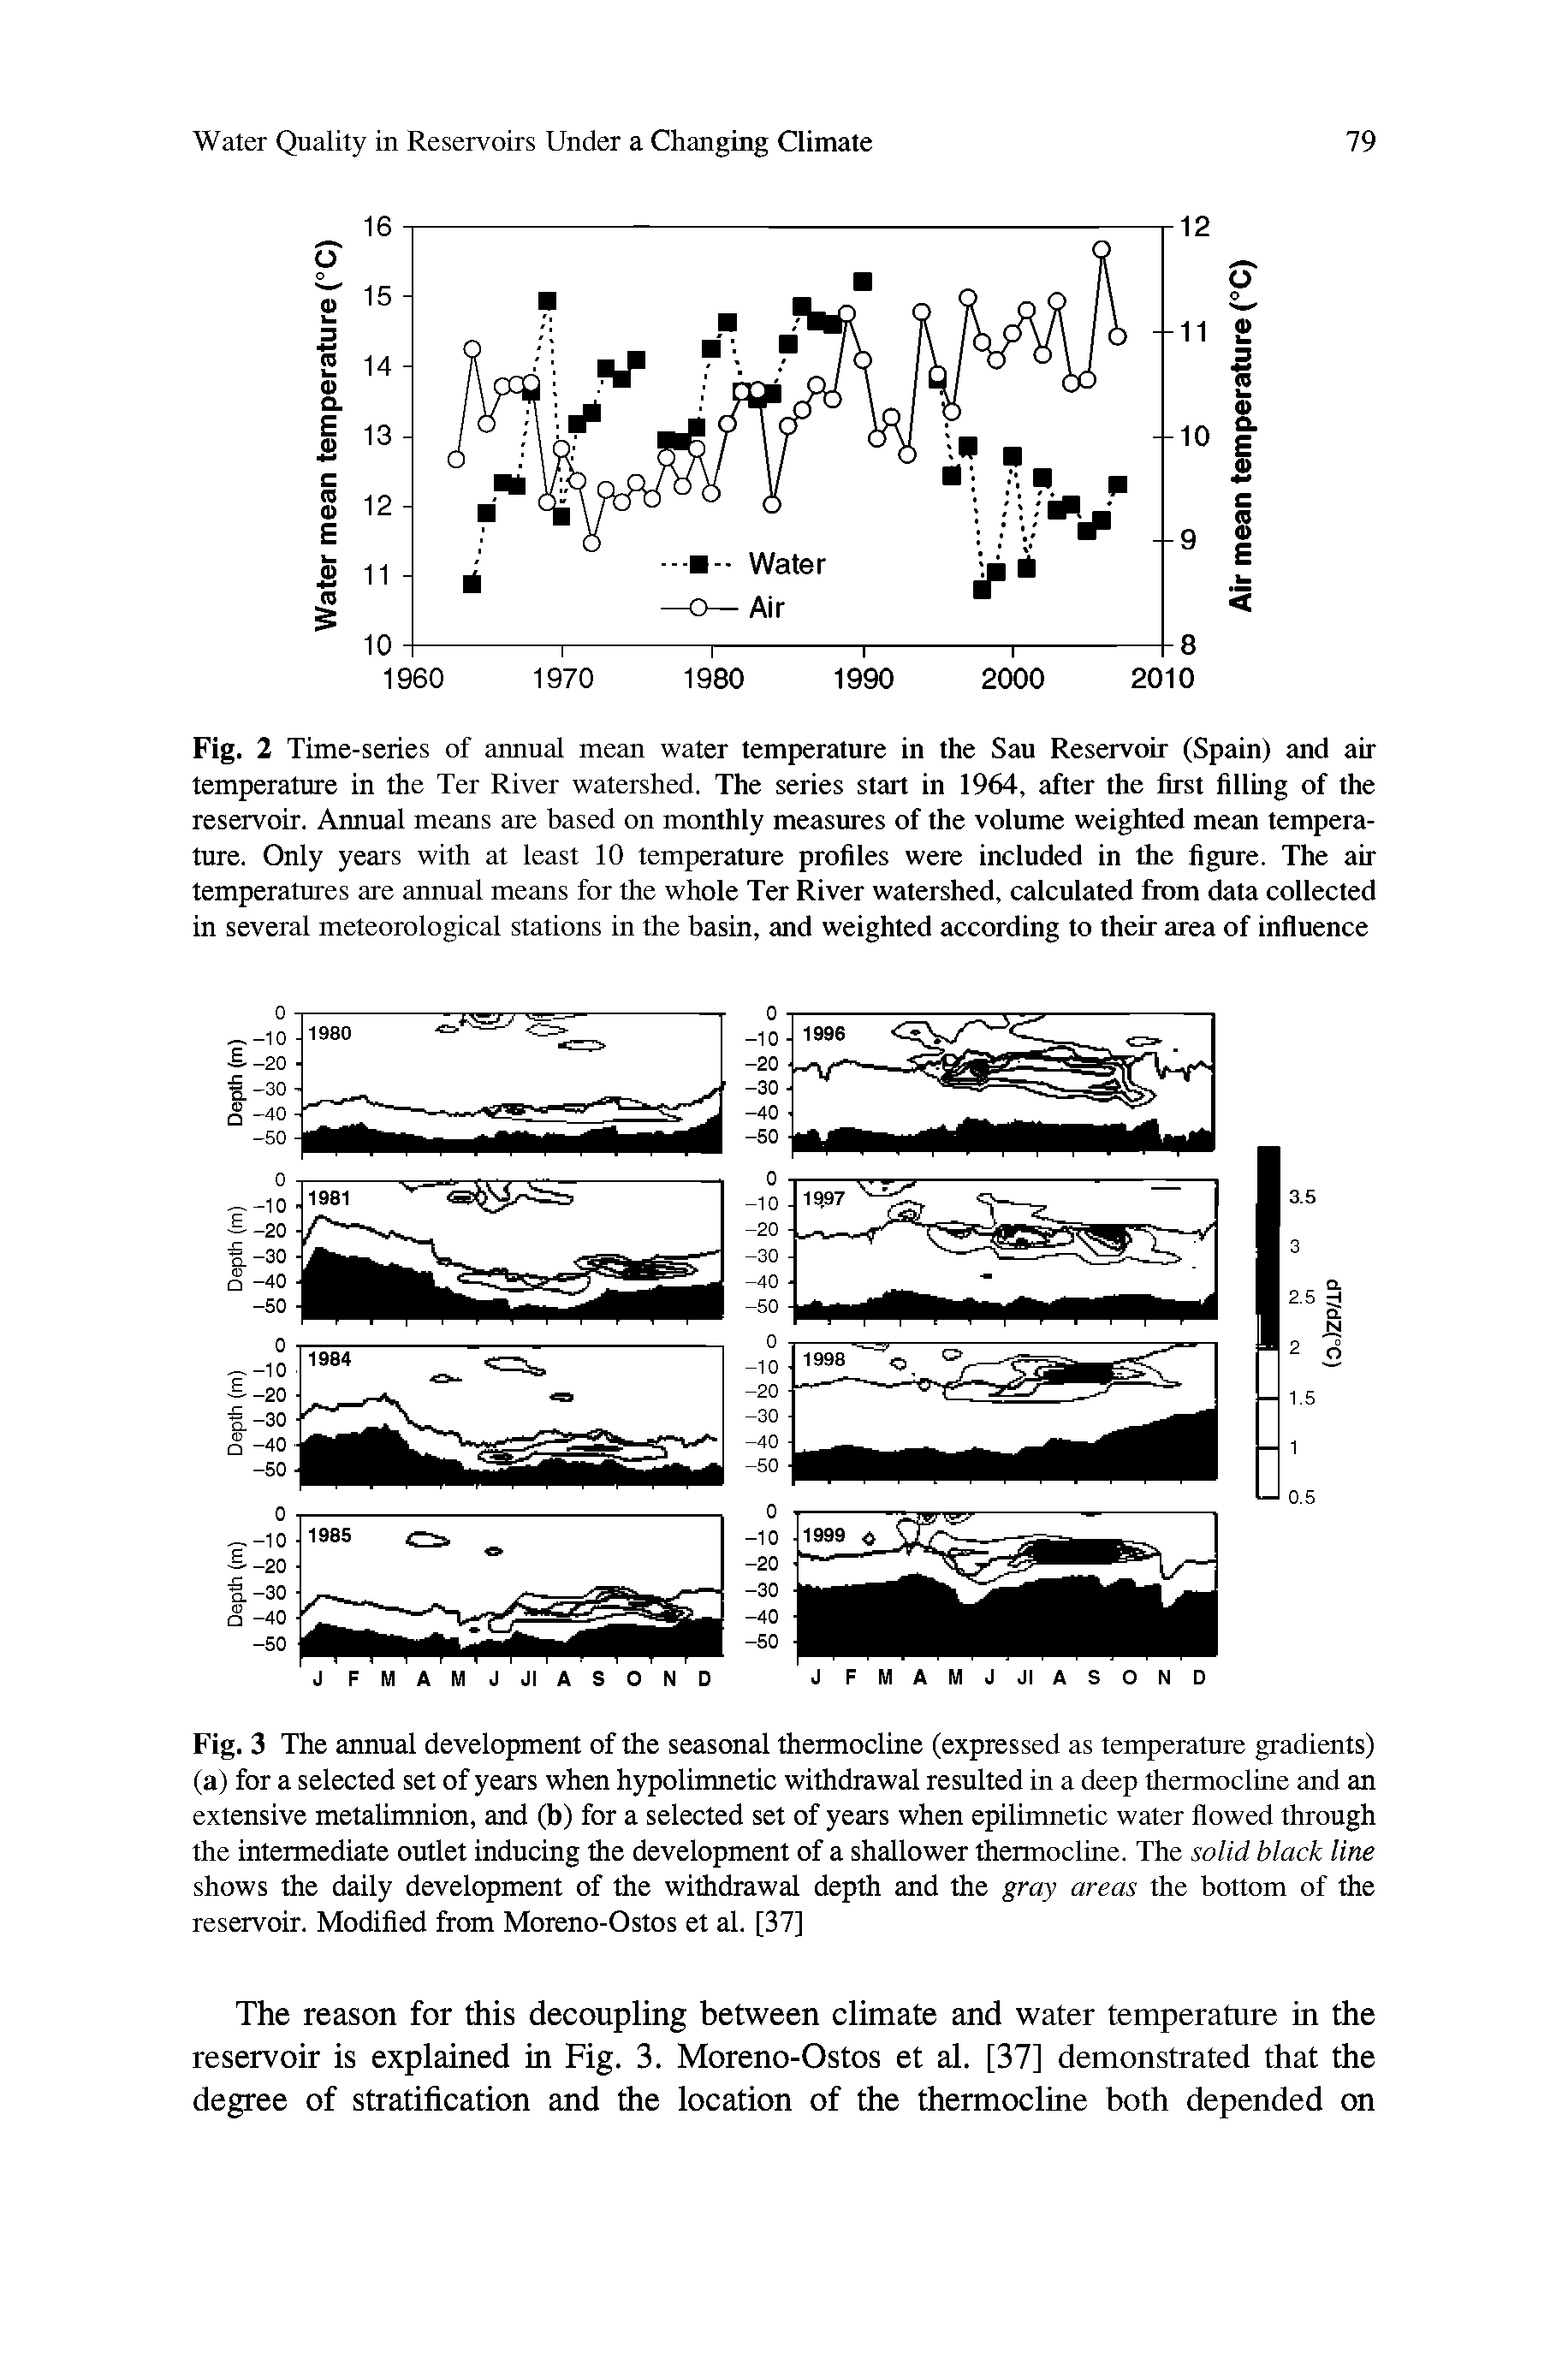 Fig. 2 Time-series of annual mean water temperature in the San Reservoir (Spain) and air temperature in the Ter River watershed. The series start in 1964, after the first filling of the reservoir. Annual means are based on monthly measures of the volume weighted mean temperature. Only years with at least 10 temperature profiles were included in the figure. The air temperatures are annual means for the whole Ter River watershed, calculated from data collected in several meteorological stations in the basin, and weighted according to their area of influence...